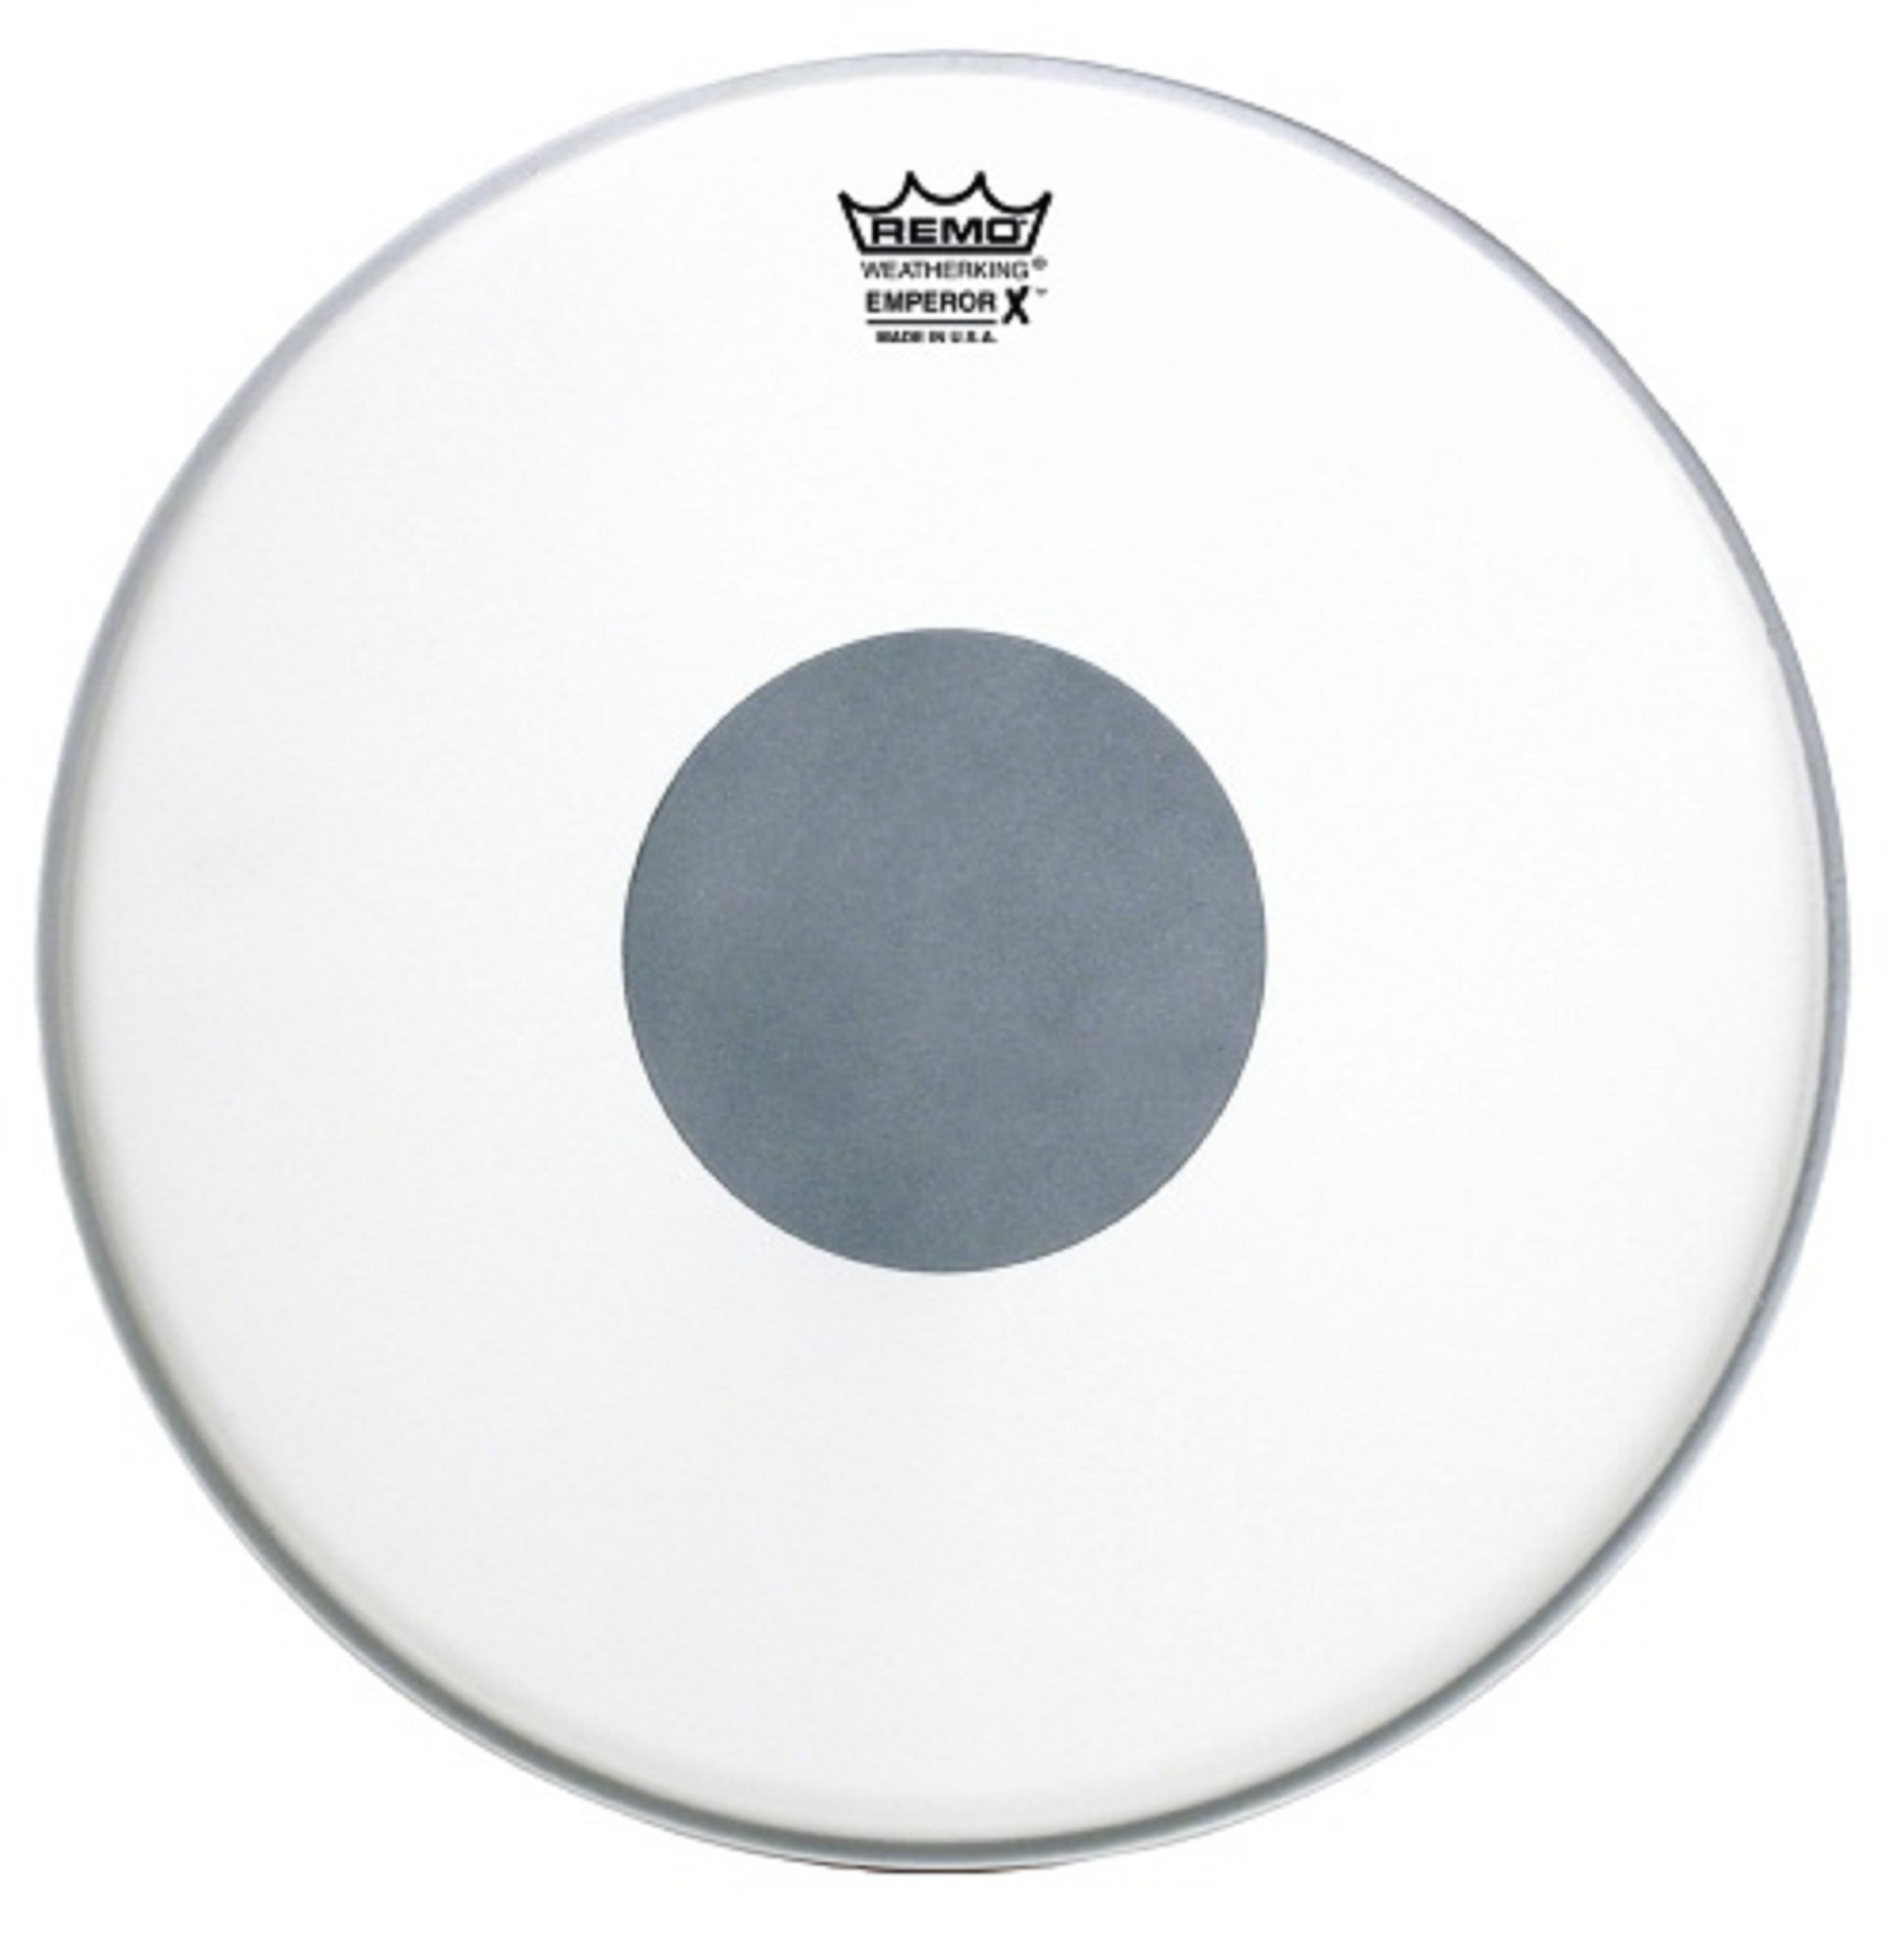 Remo Fell Emperor X 14" Coated mit Dot